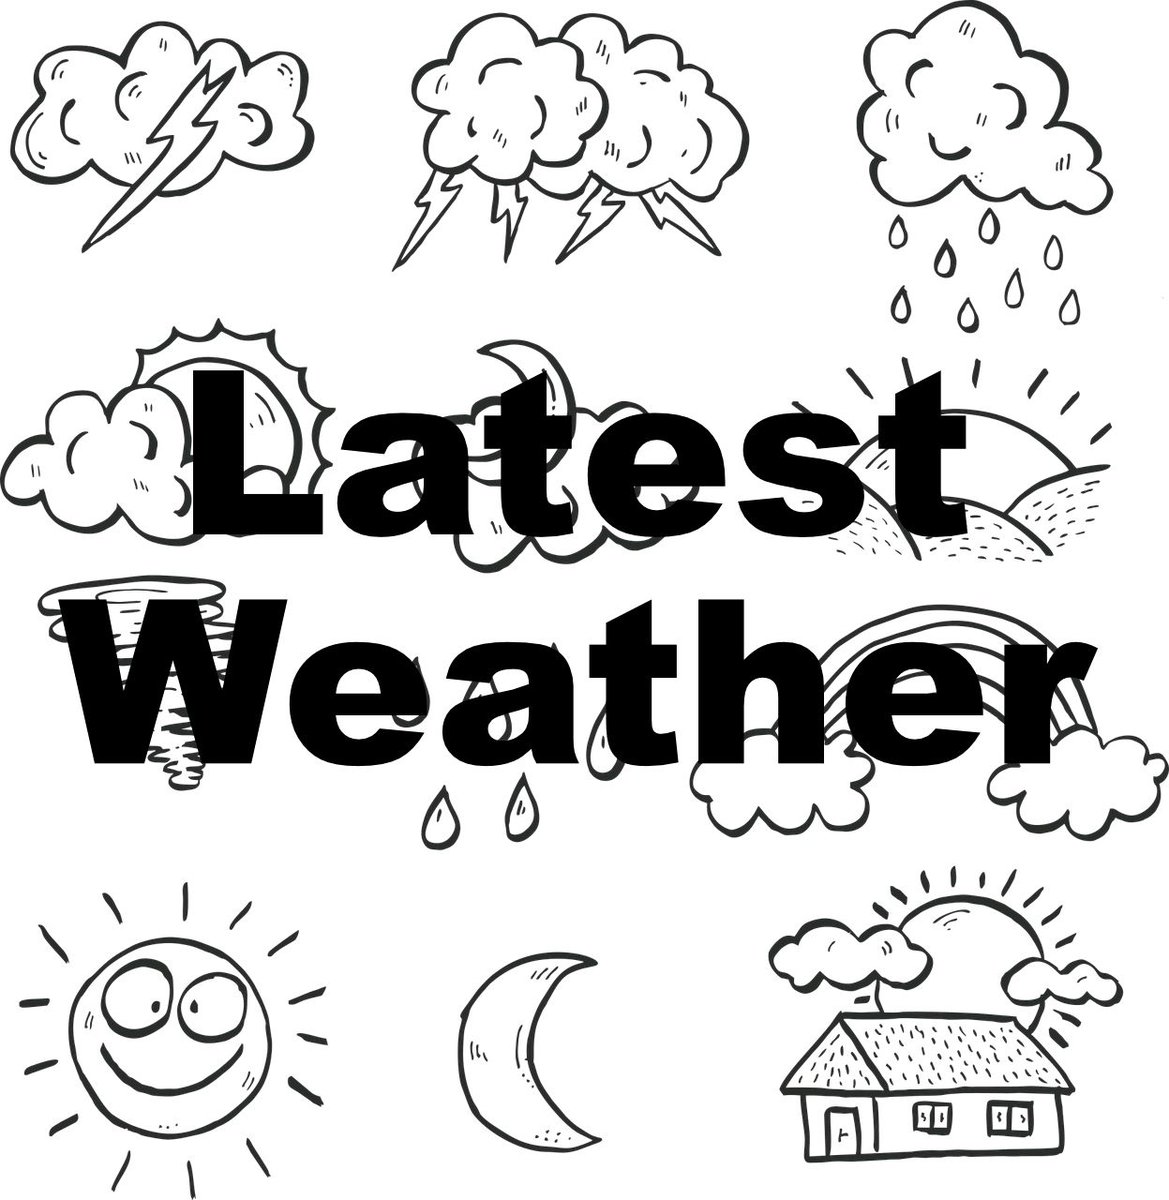 🌥️🌬️ Weekend Weather Update: Saturday will be cloudy with a breeze at 10°C, while Sunday is expected to be overcast with a high of 11°C. Have a great weekend, everyone! ☁️🌦️ #WeekendWeather #EnjoyYourWeekend